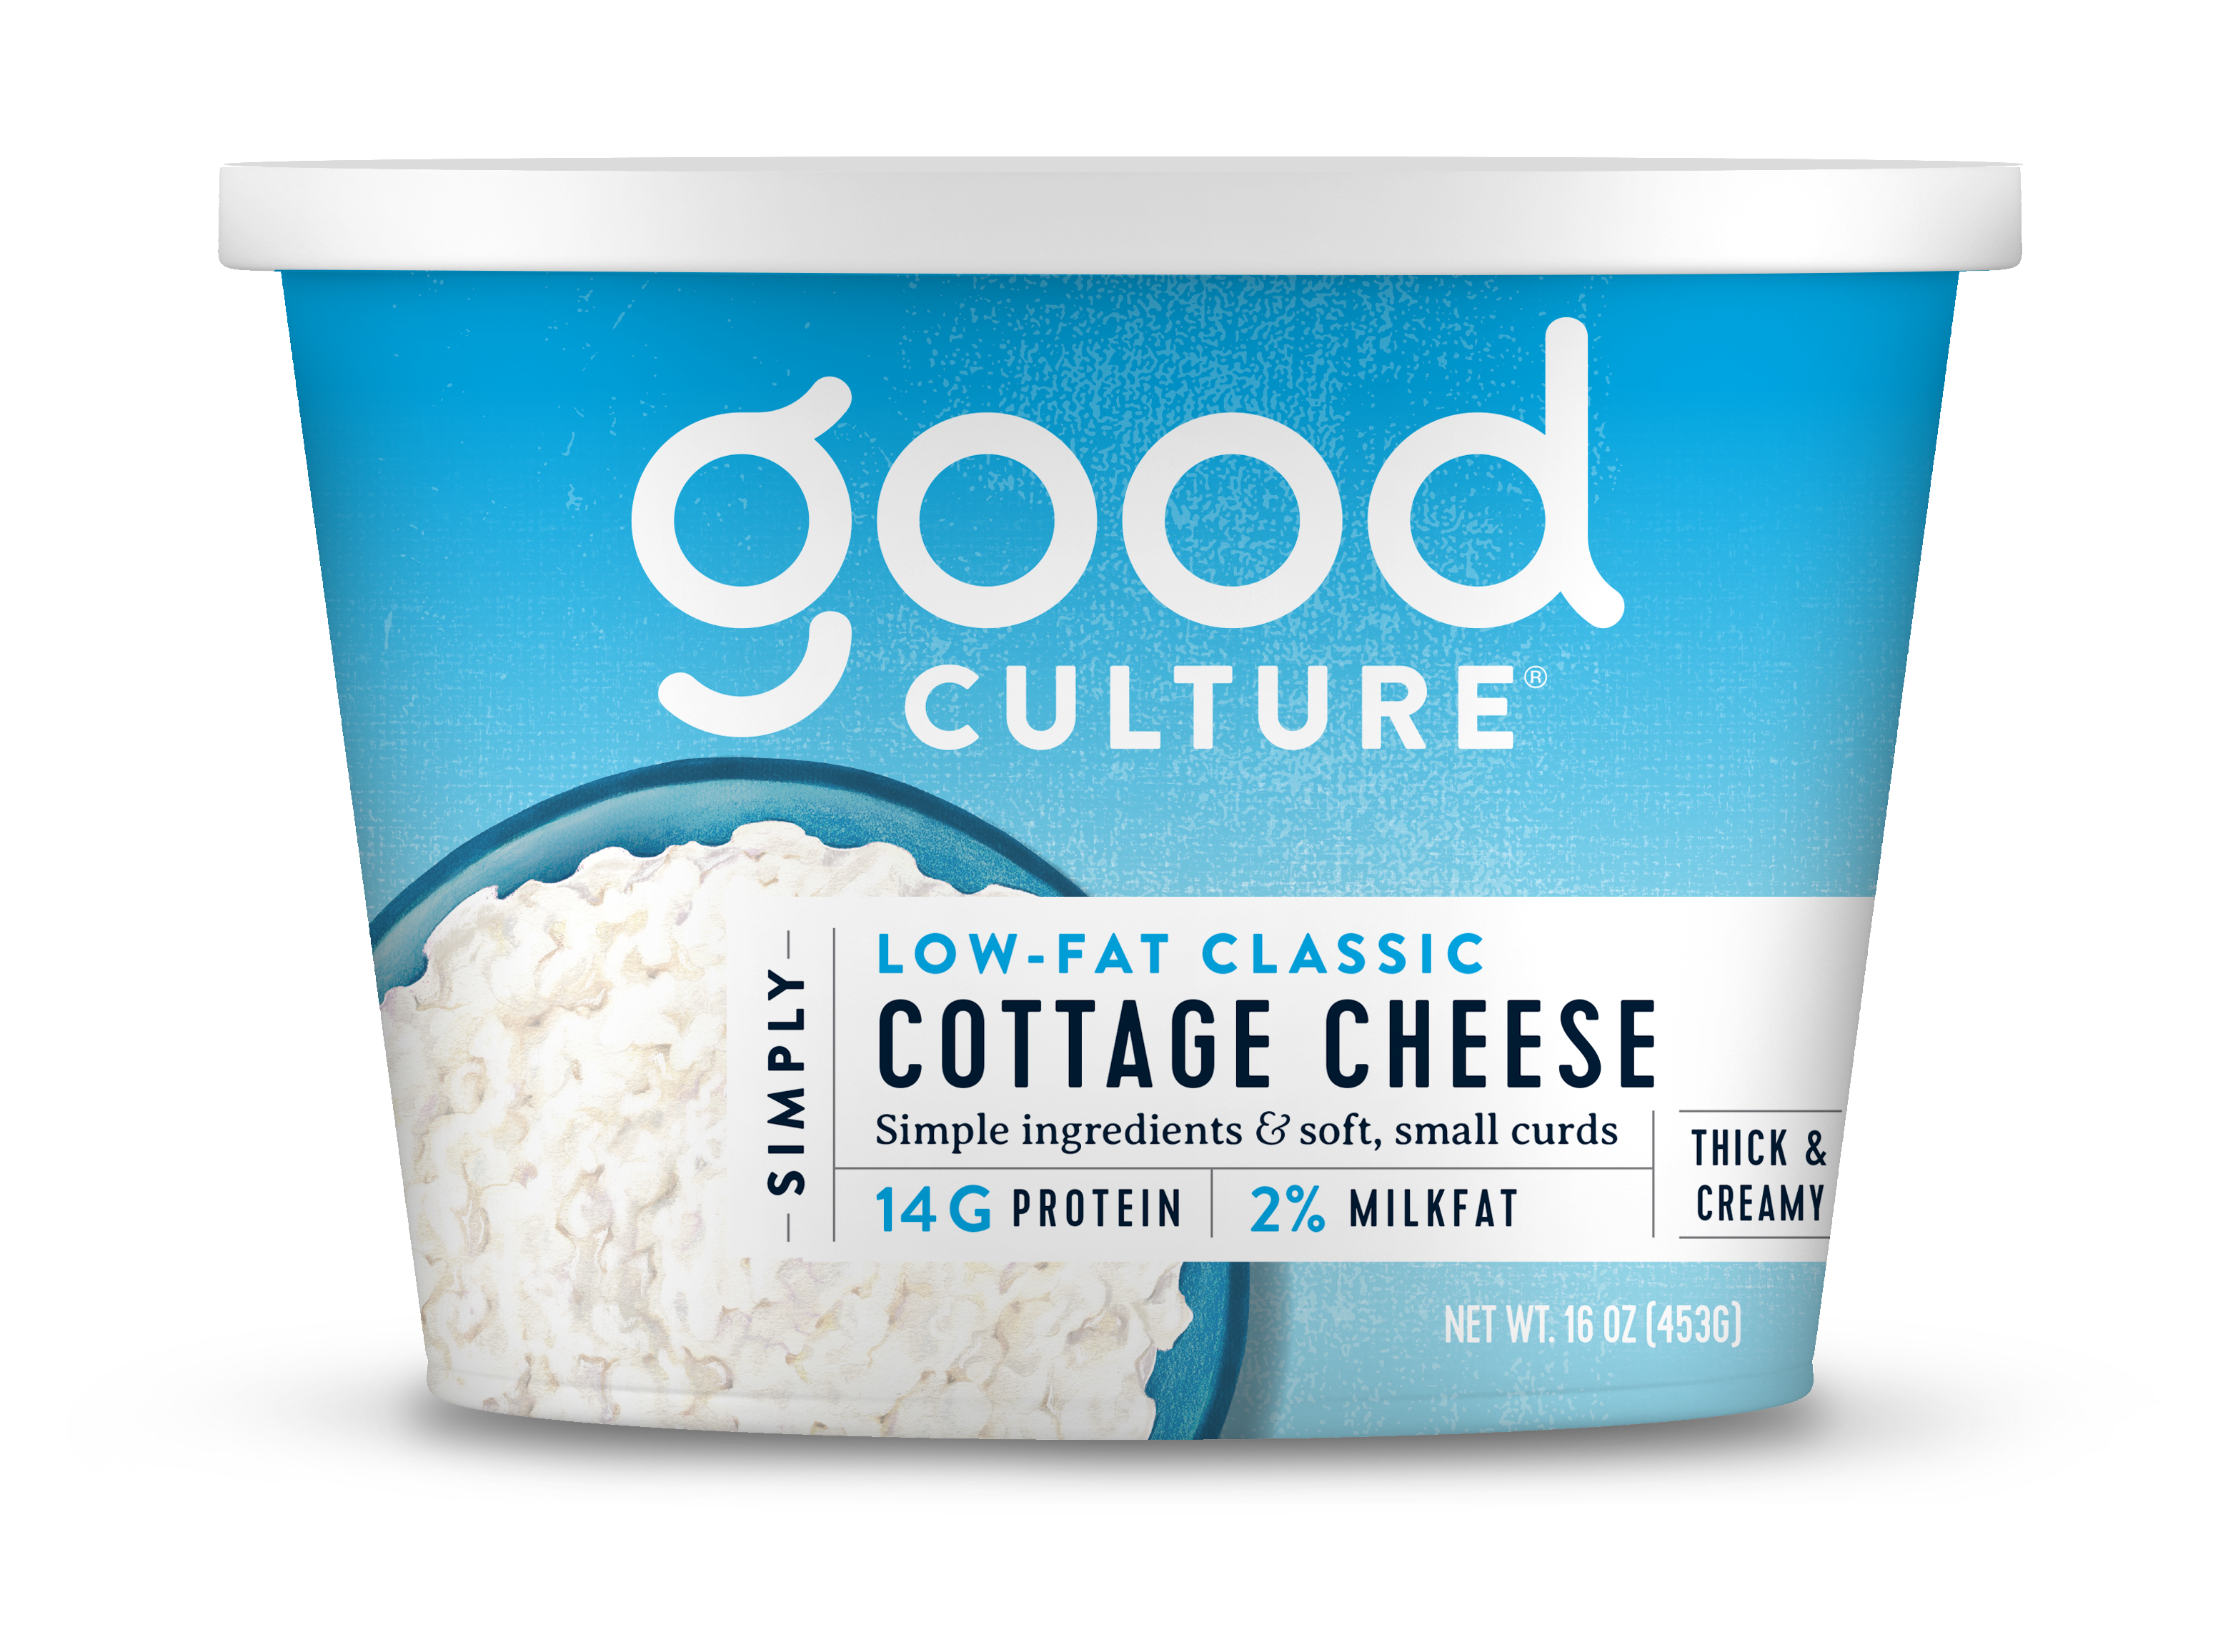 Good Culture Simply Low-Fat Classic Cottage Cheese 6 units per case 16.0 oz